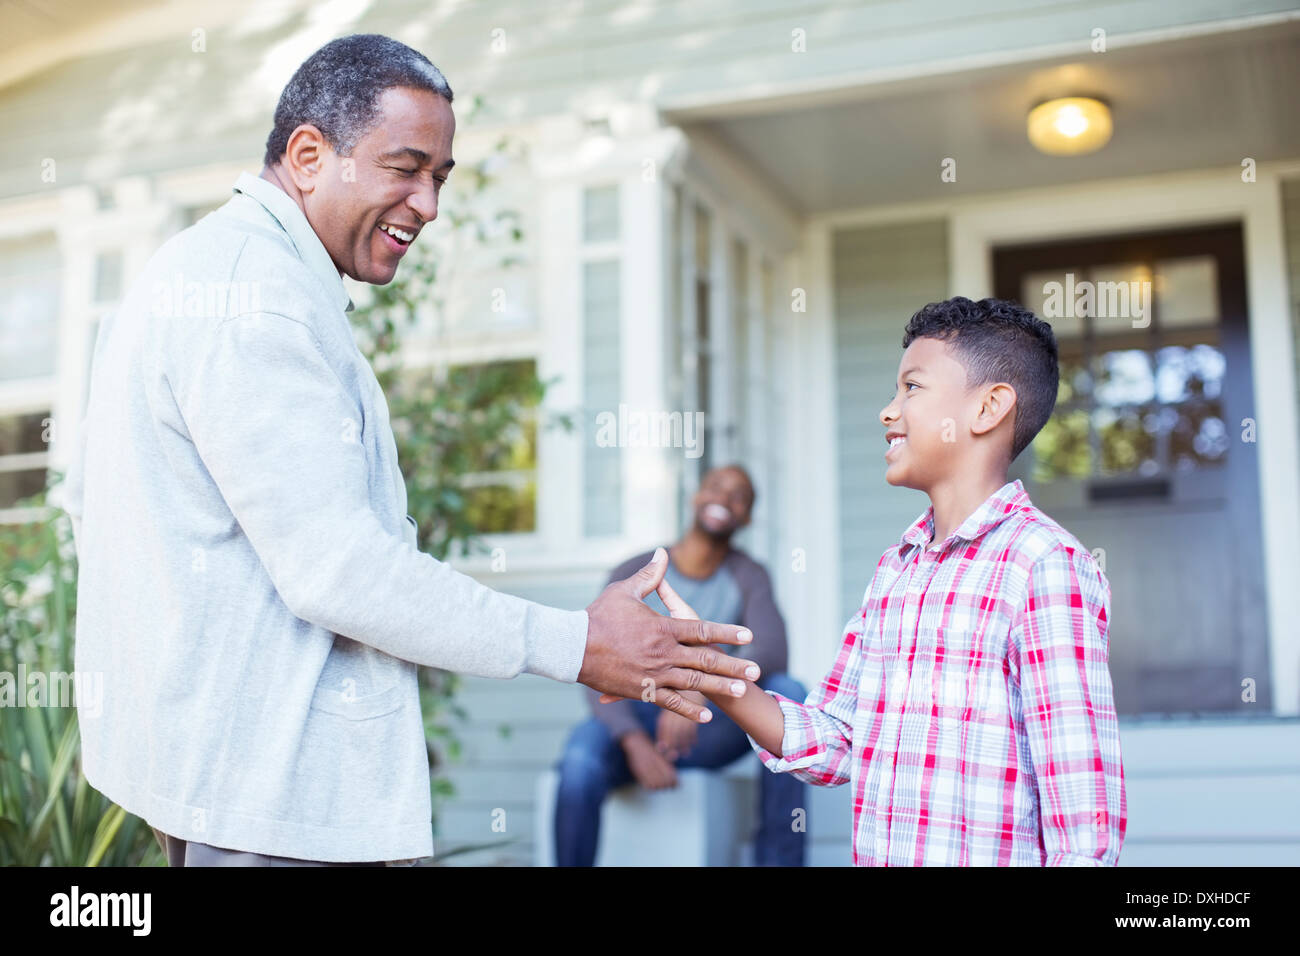 Grandfather and grandson exchanging special handshake outdoors Stock Photo